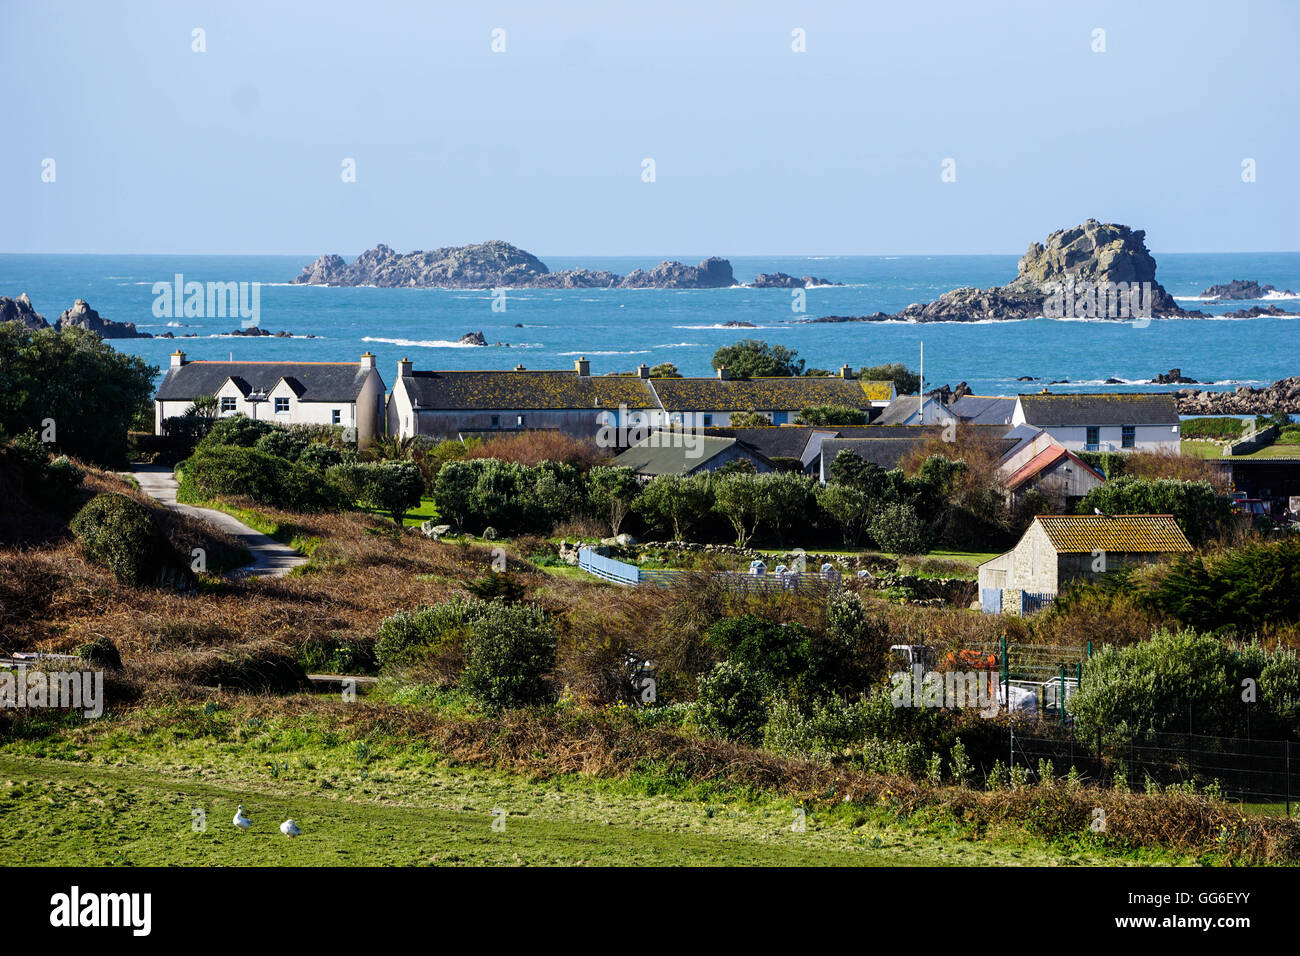 Bryher, Isles of Scilly, England, United Kingdom, Europe Stock Photo